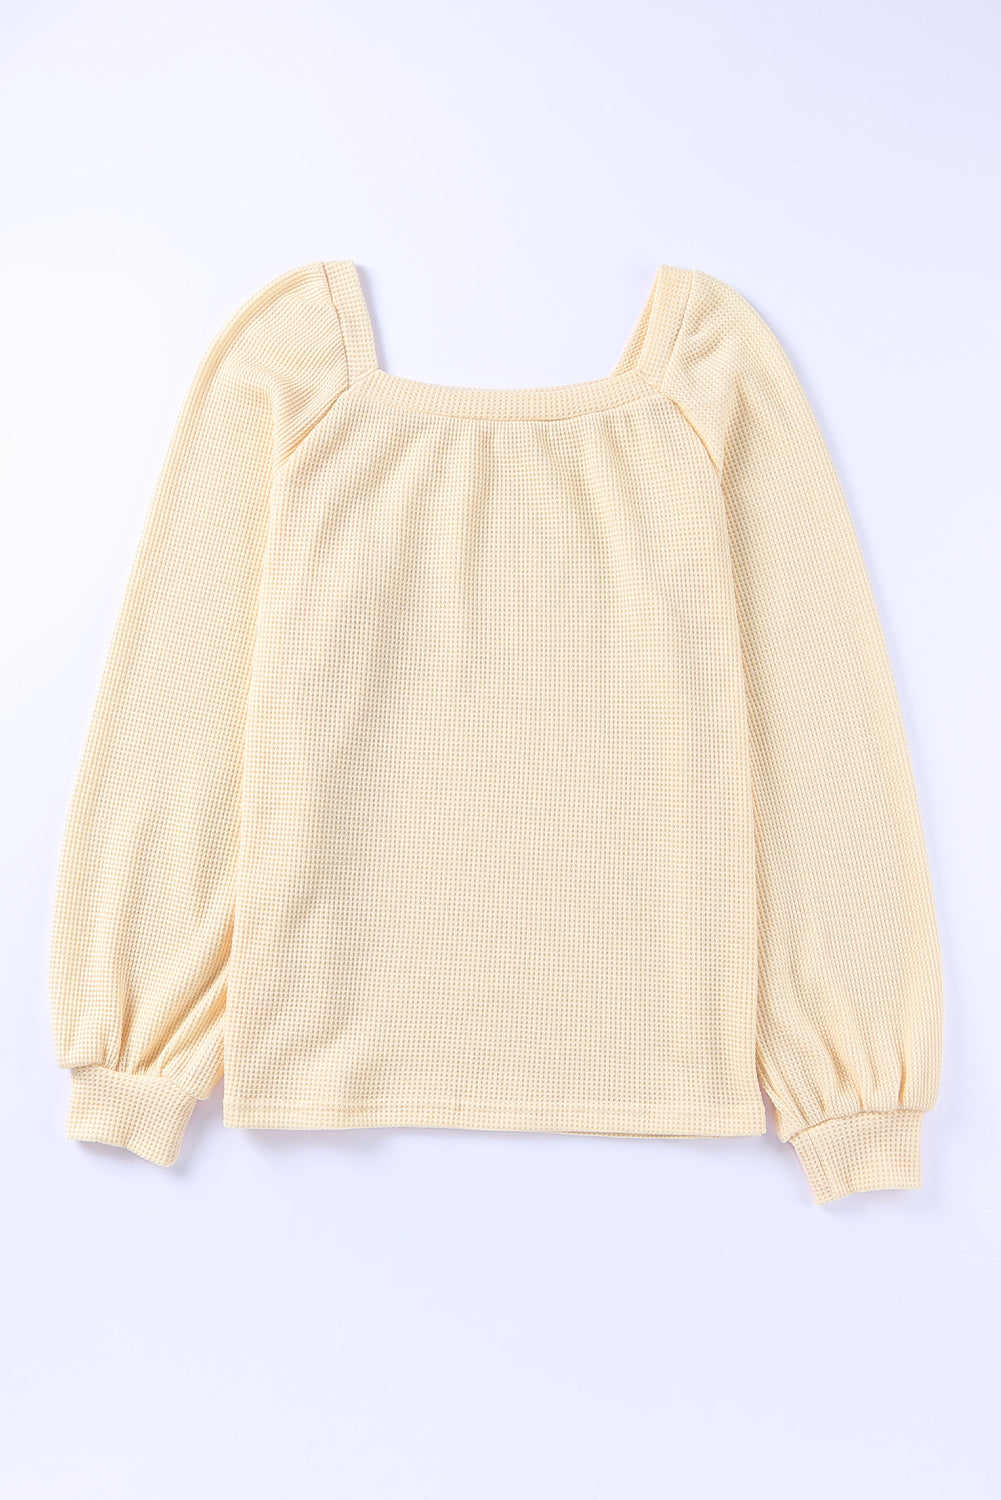 Apricot Scoop Neck Puff Sleeve Waffle Knit Top